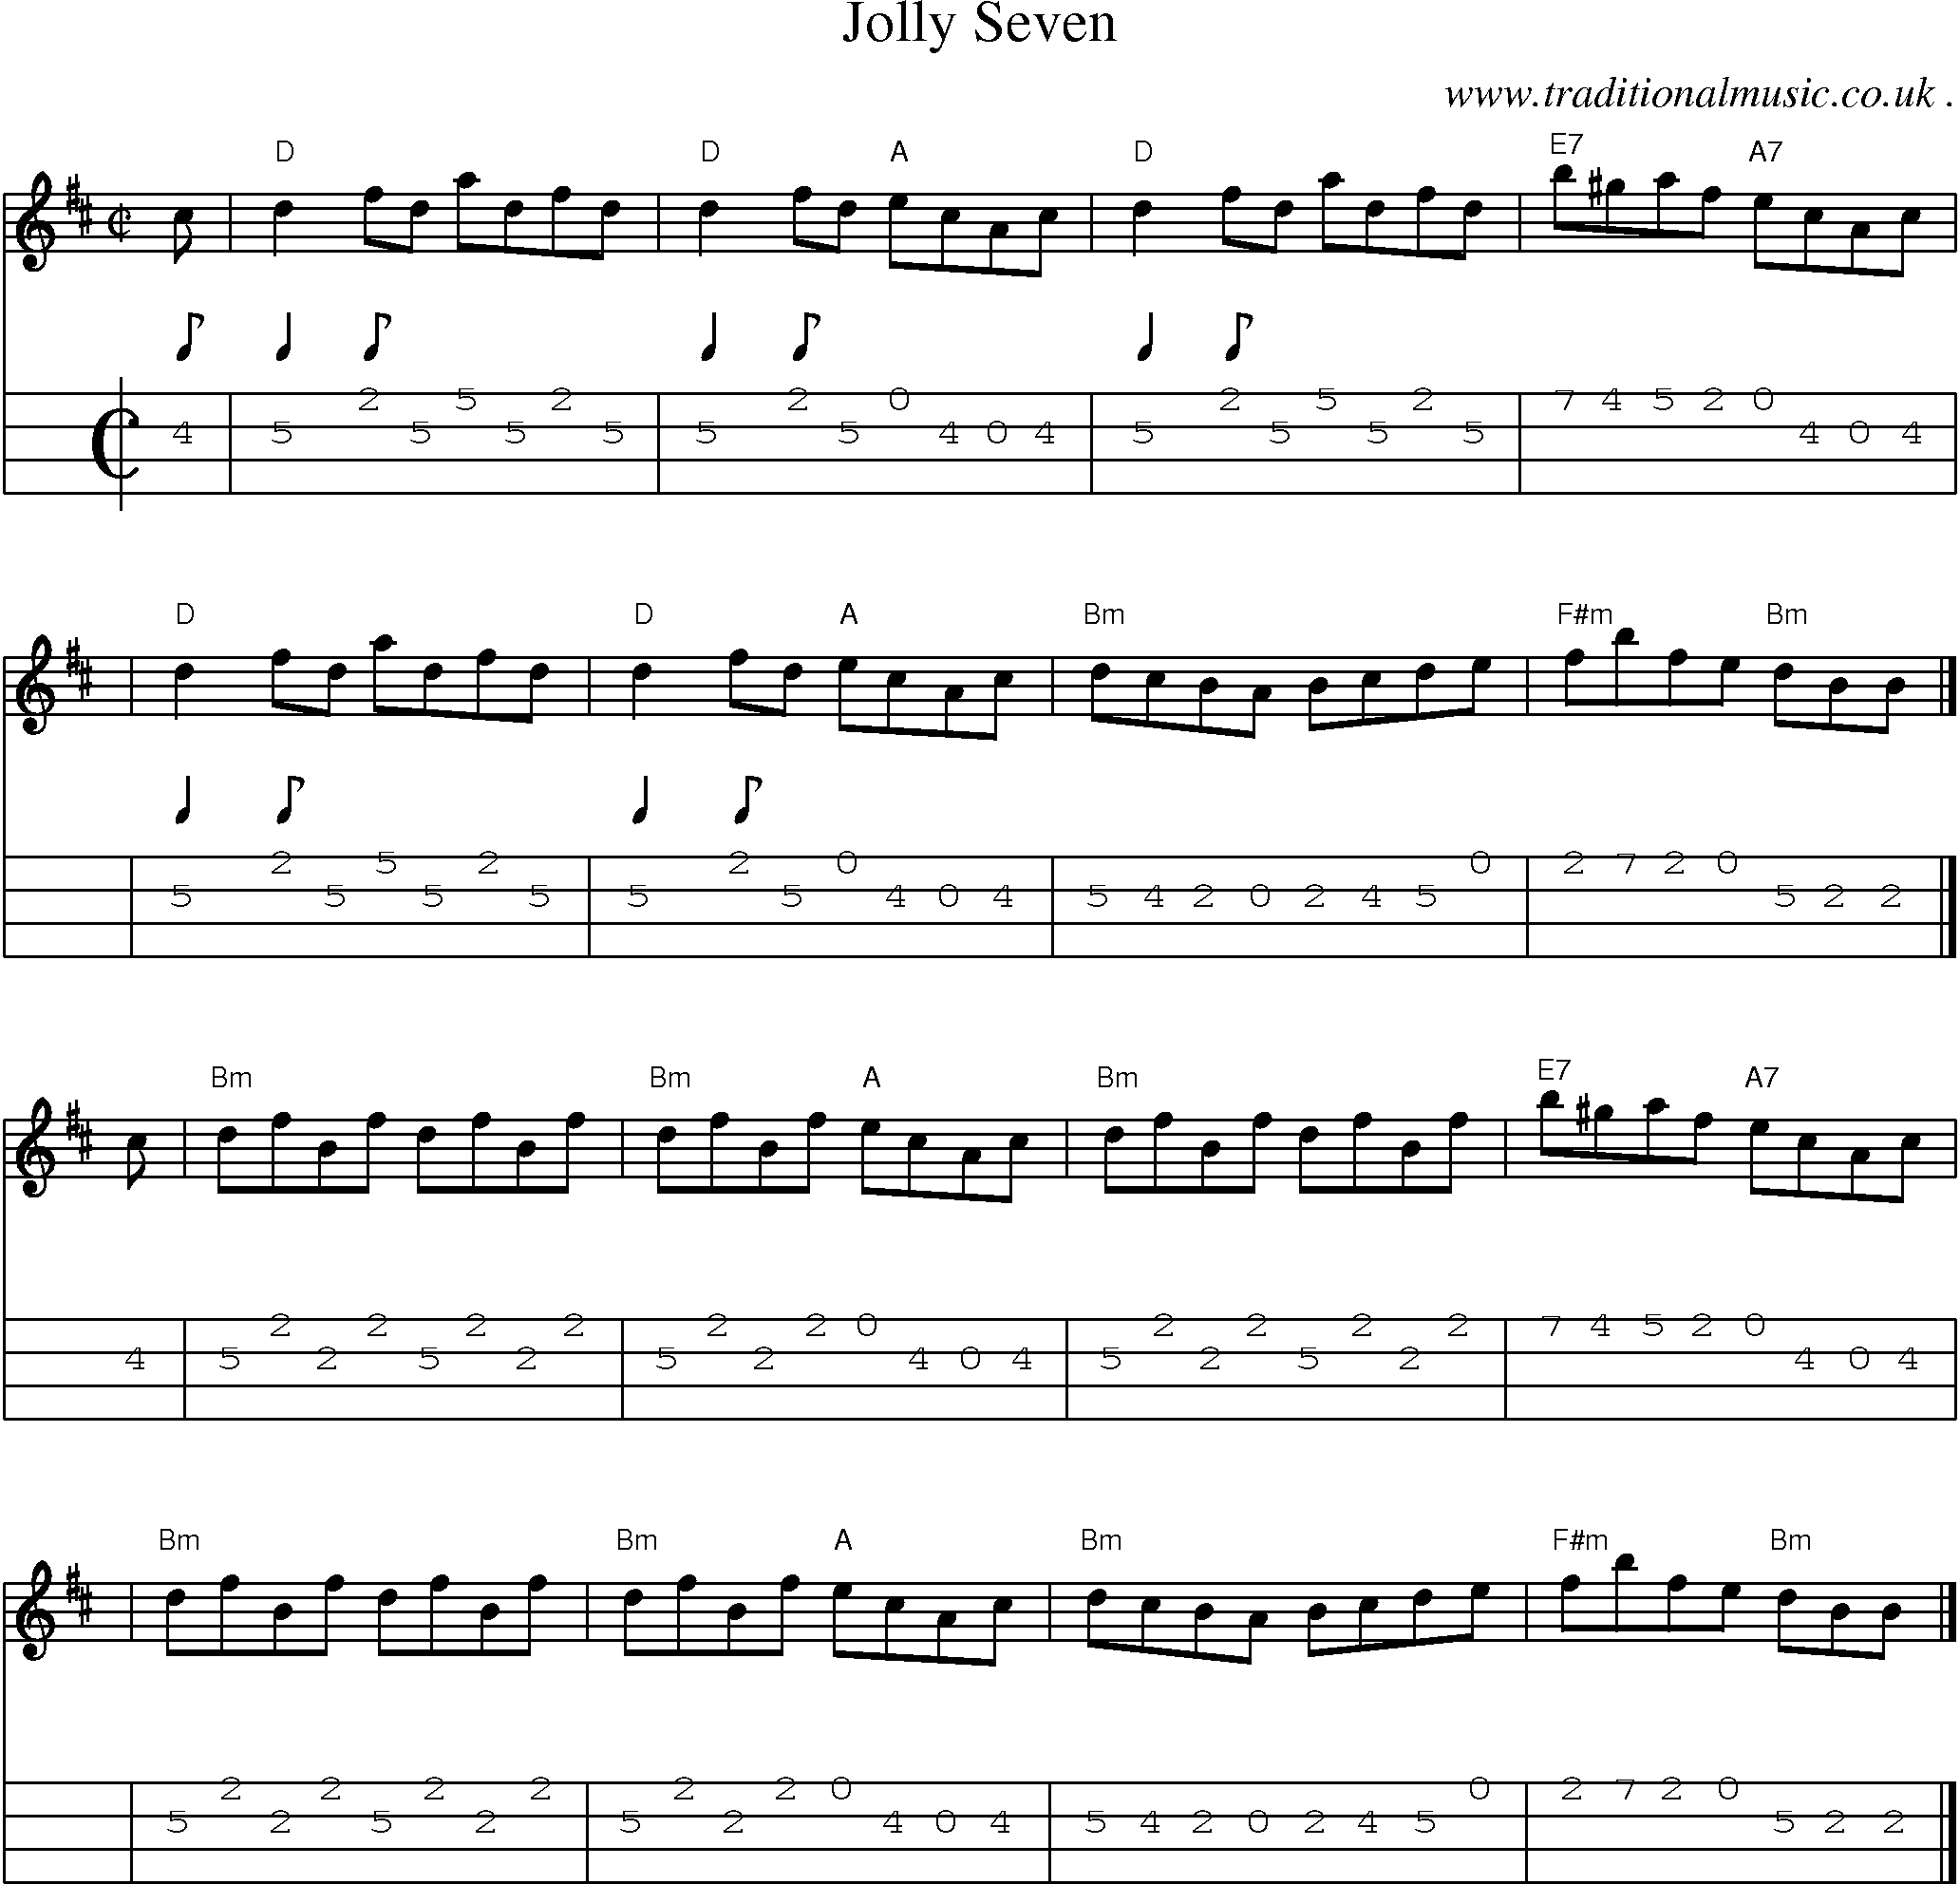 Sheet-music  score, Chords and Mandolin Tabs for Jolly Seven